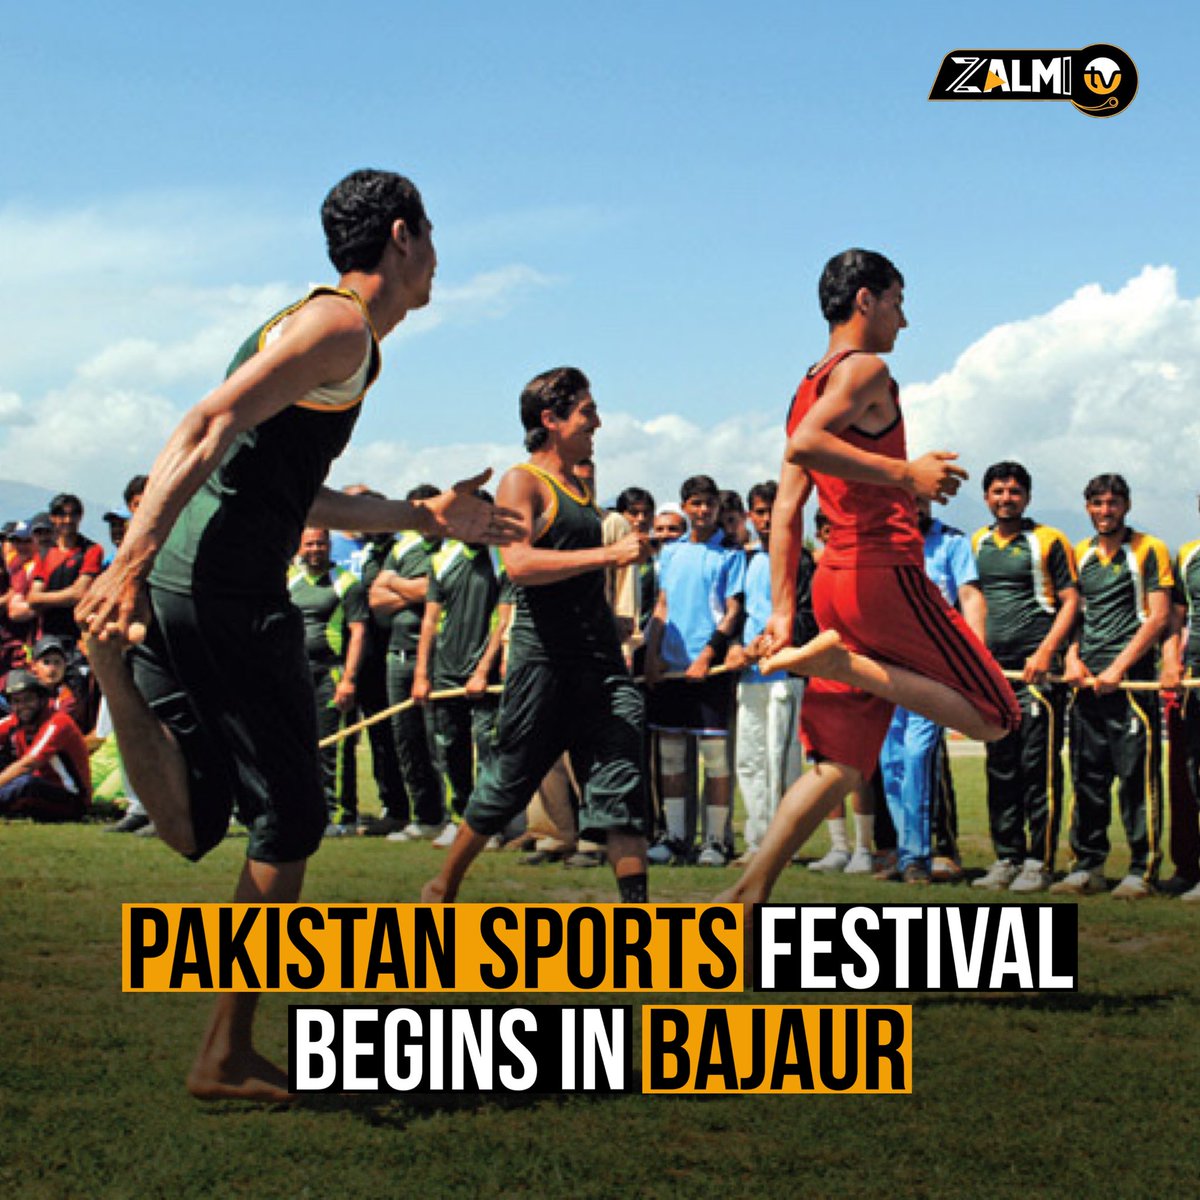 Pakistan Sports Fest 2024 begins at Bajaur Complex, featuring cricket, football, volleyball, basketball, cultural shows, and traditional cuisines. It concludes on May 21. #PakistanSportsFestival #SoortsUpdate #ZalmiTV